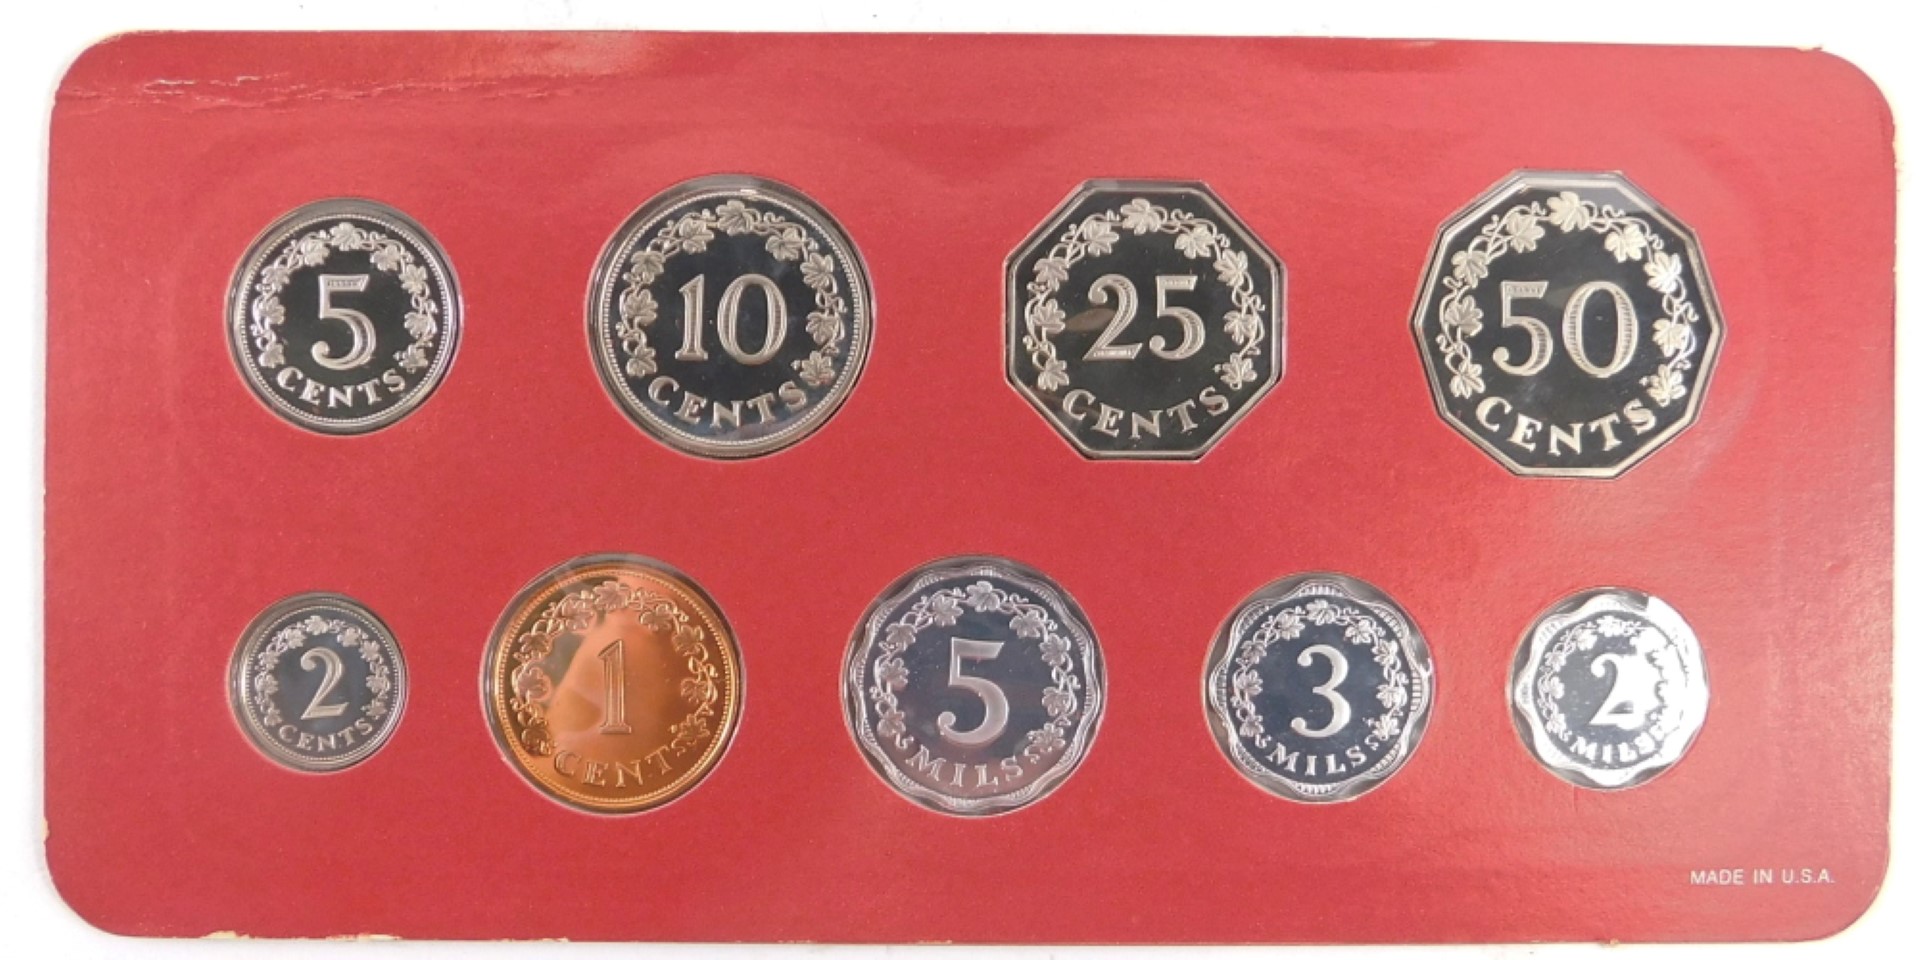 A Republic of Malta decimal proof coin set, with certificate from 1977, in presentation pack. - Image 2 of 3